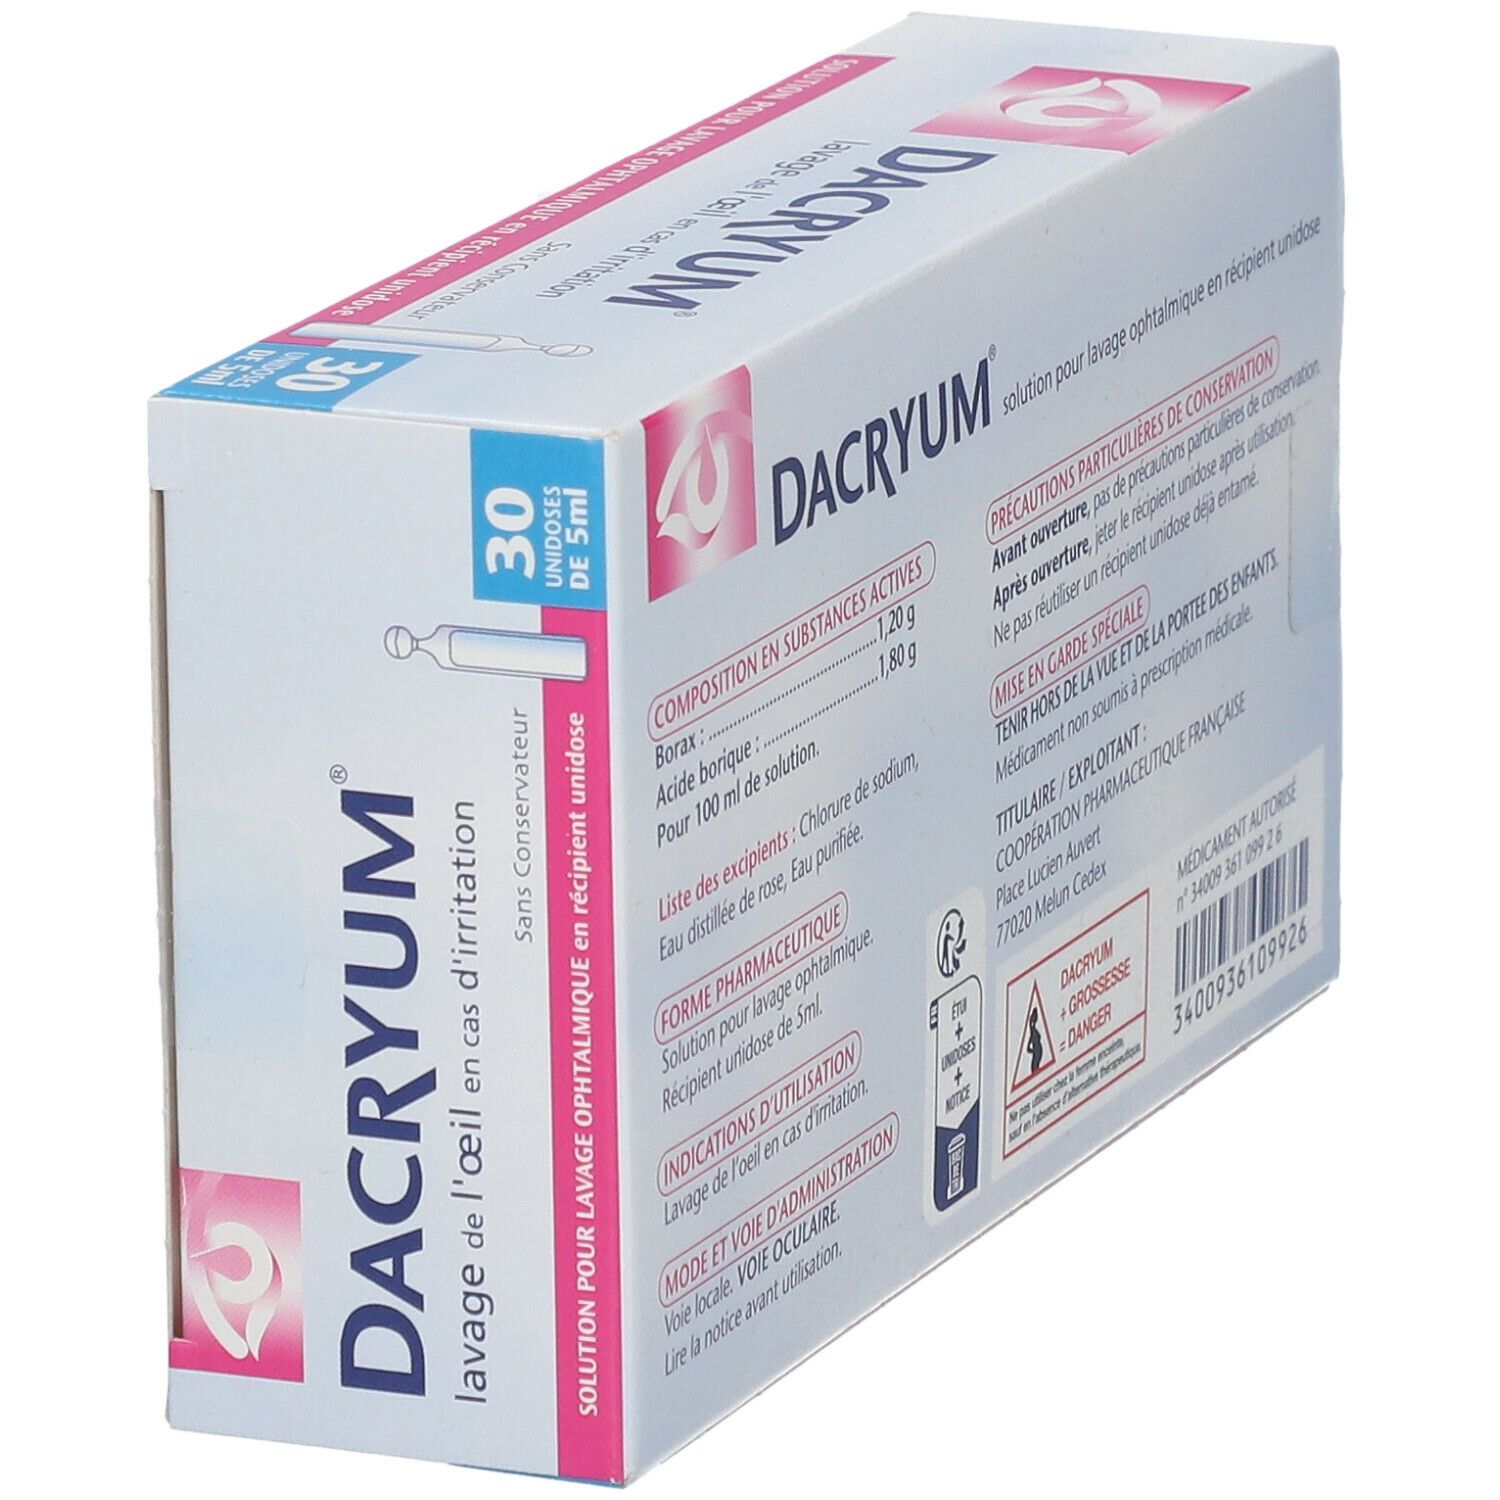 Dacryum Solution Lavage Oculaire 30 Unidoses